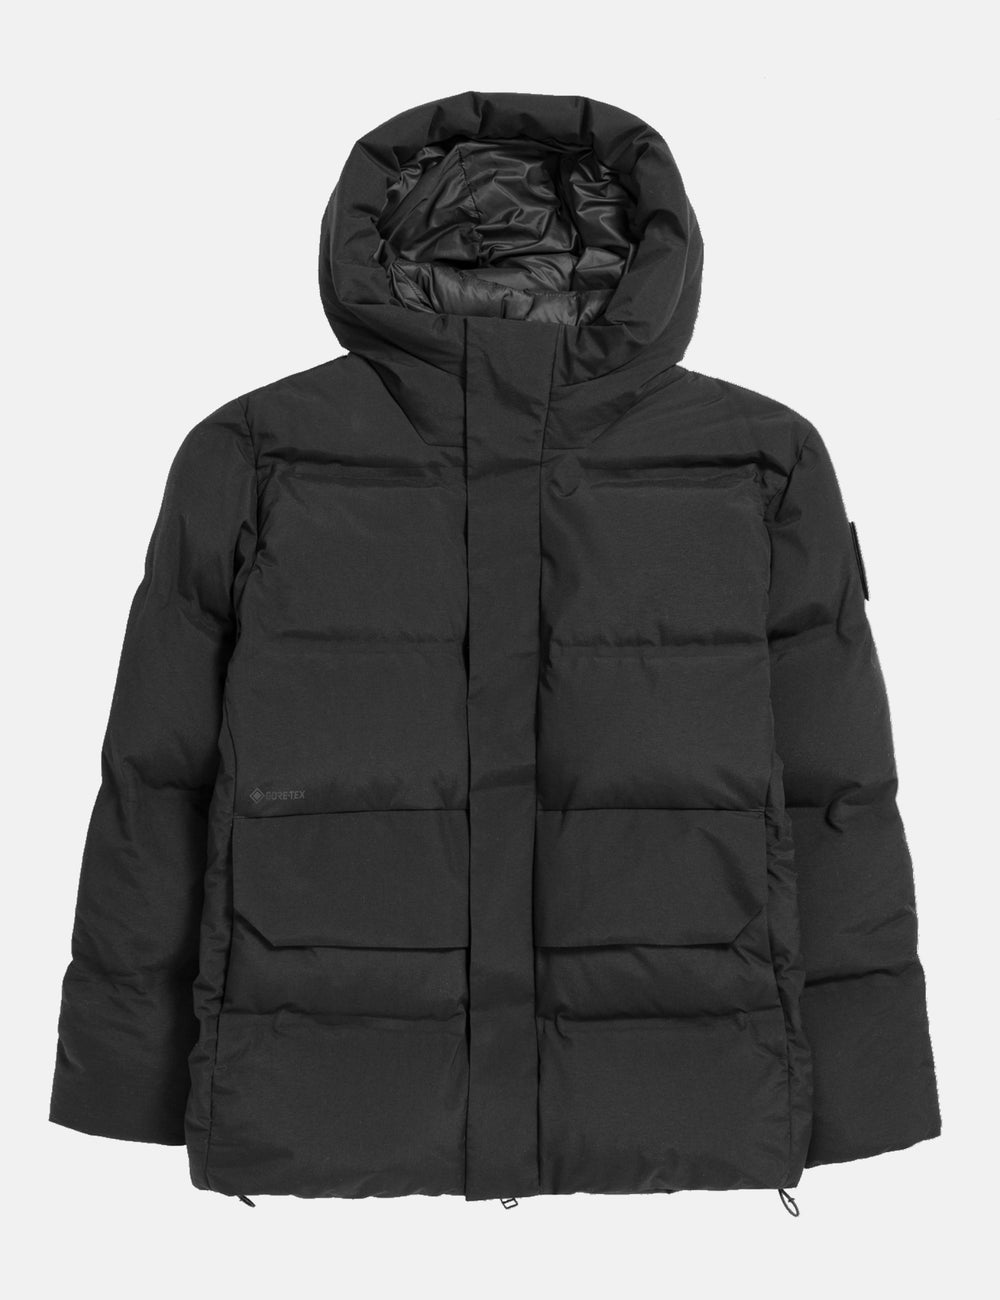 Urban Mountain – ARKTISK Projects Norse EXCESS URBAN Excess. Black Parka - |